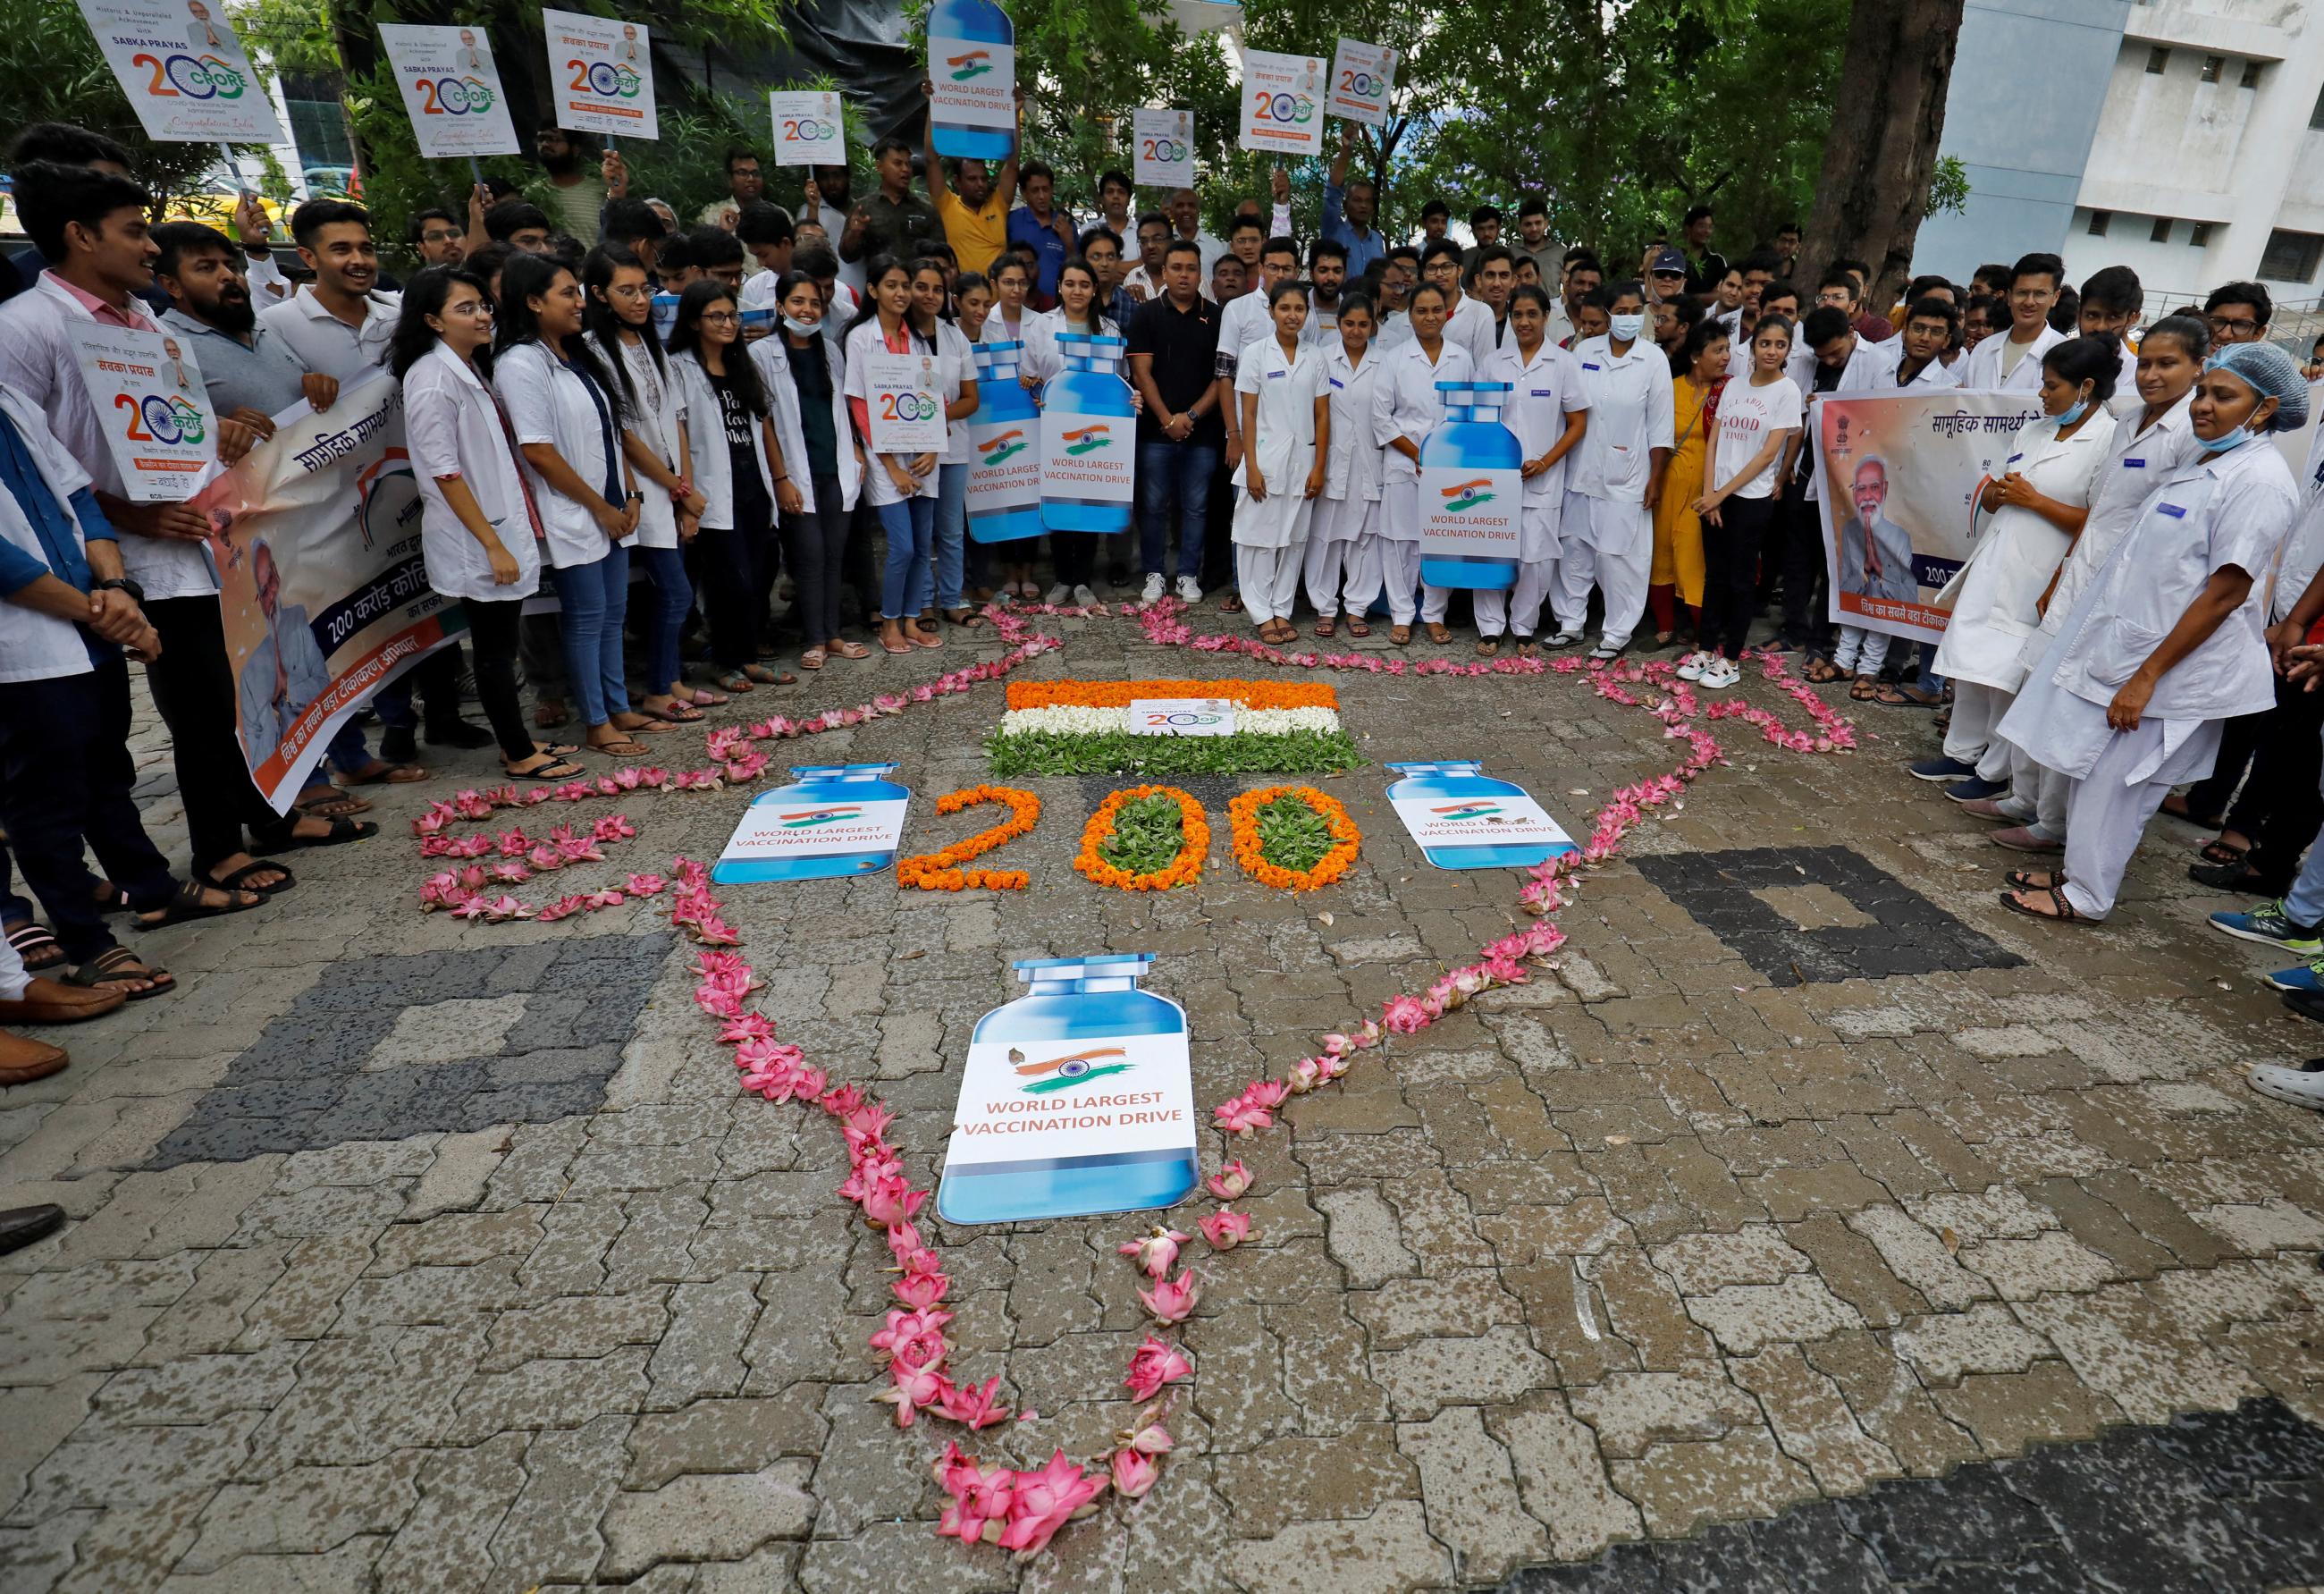 Medical staff and students stand around a design on the ground, made of pink flower blossoms in the shape of the country of India, to celebrate India administering 2 billion doses of COVID-19 vaccines at a hospital in Ahmedabad, India, on July 17, 2022. REUTERS/Amit Dave